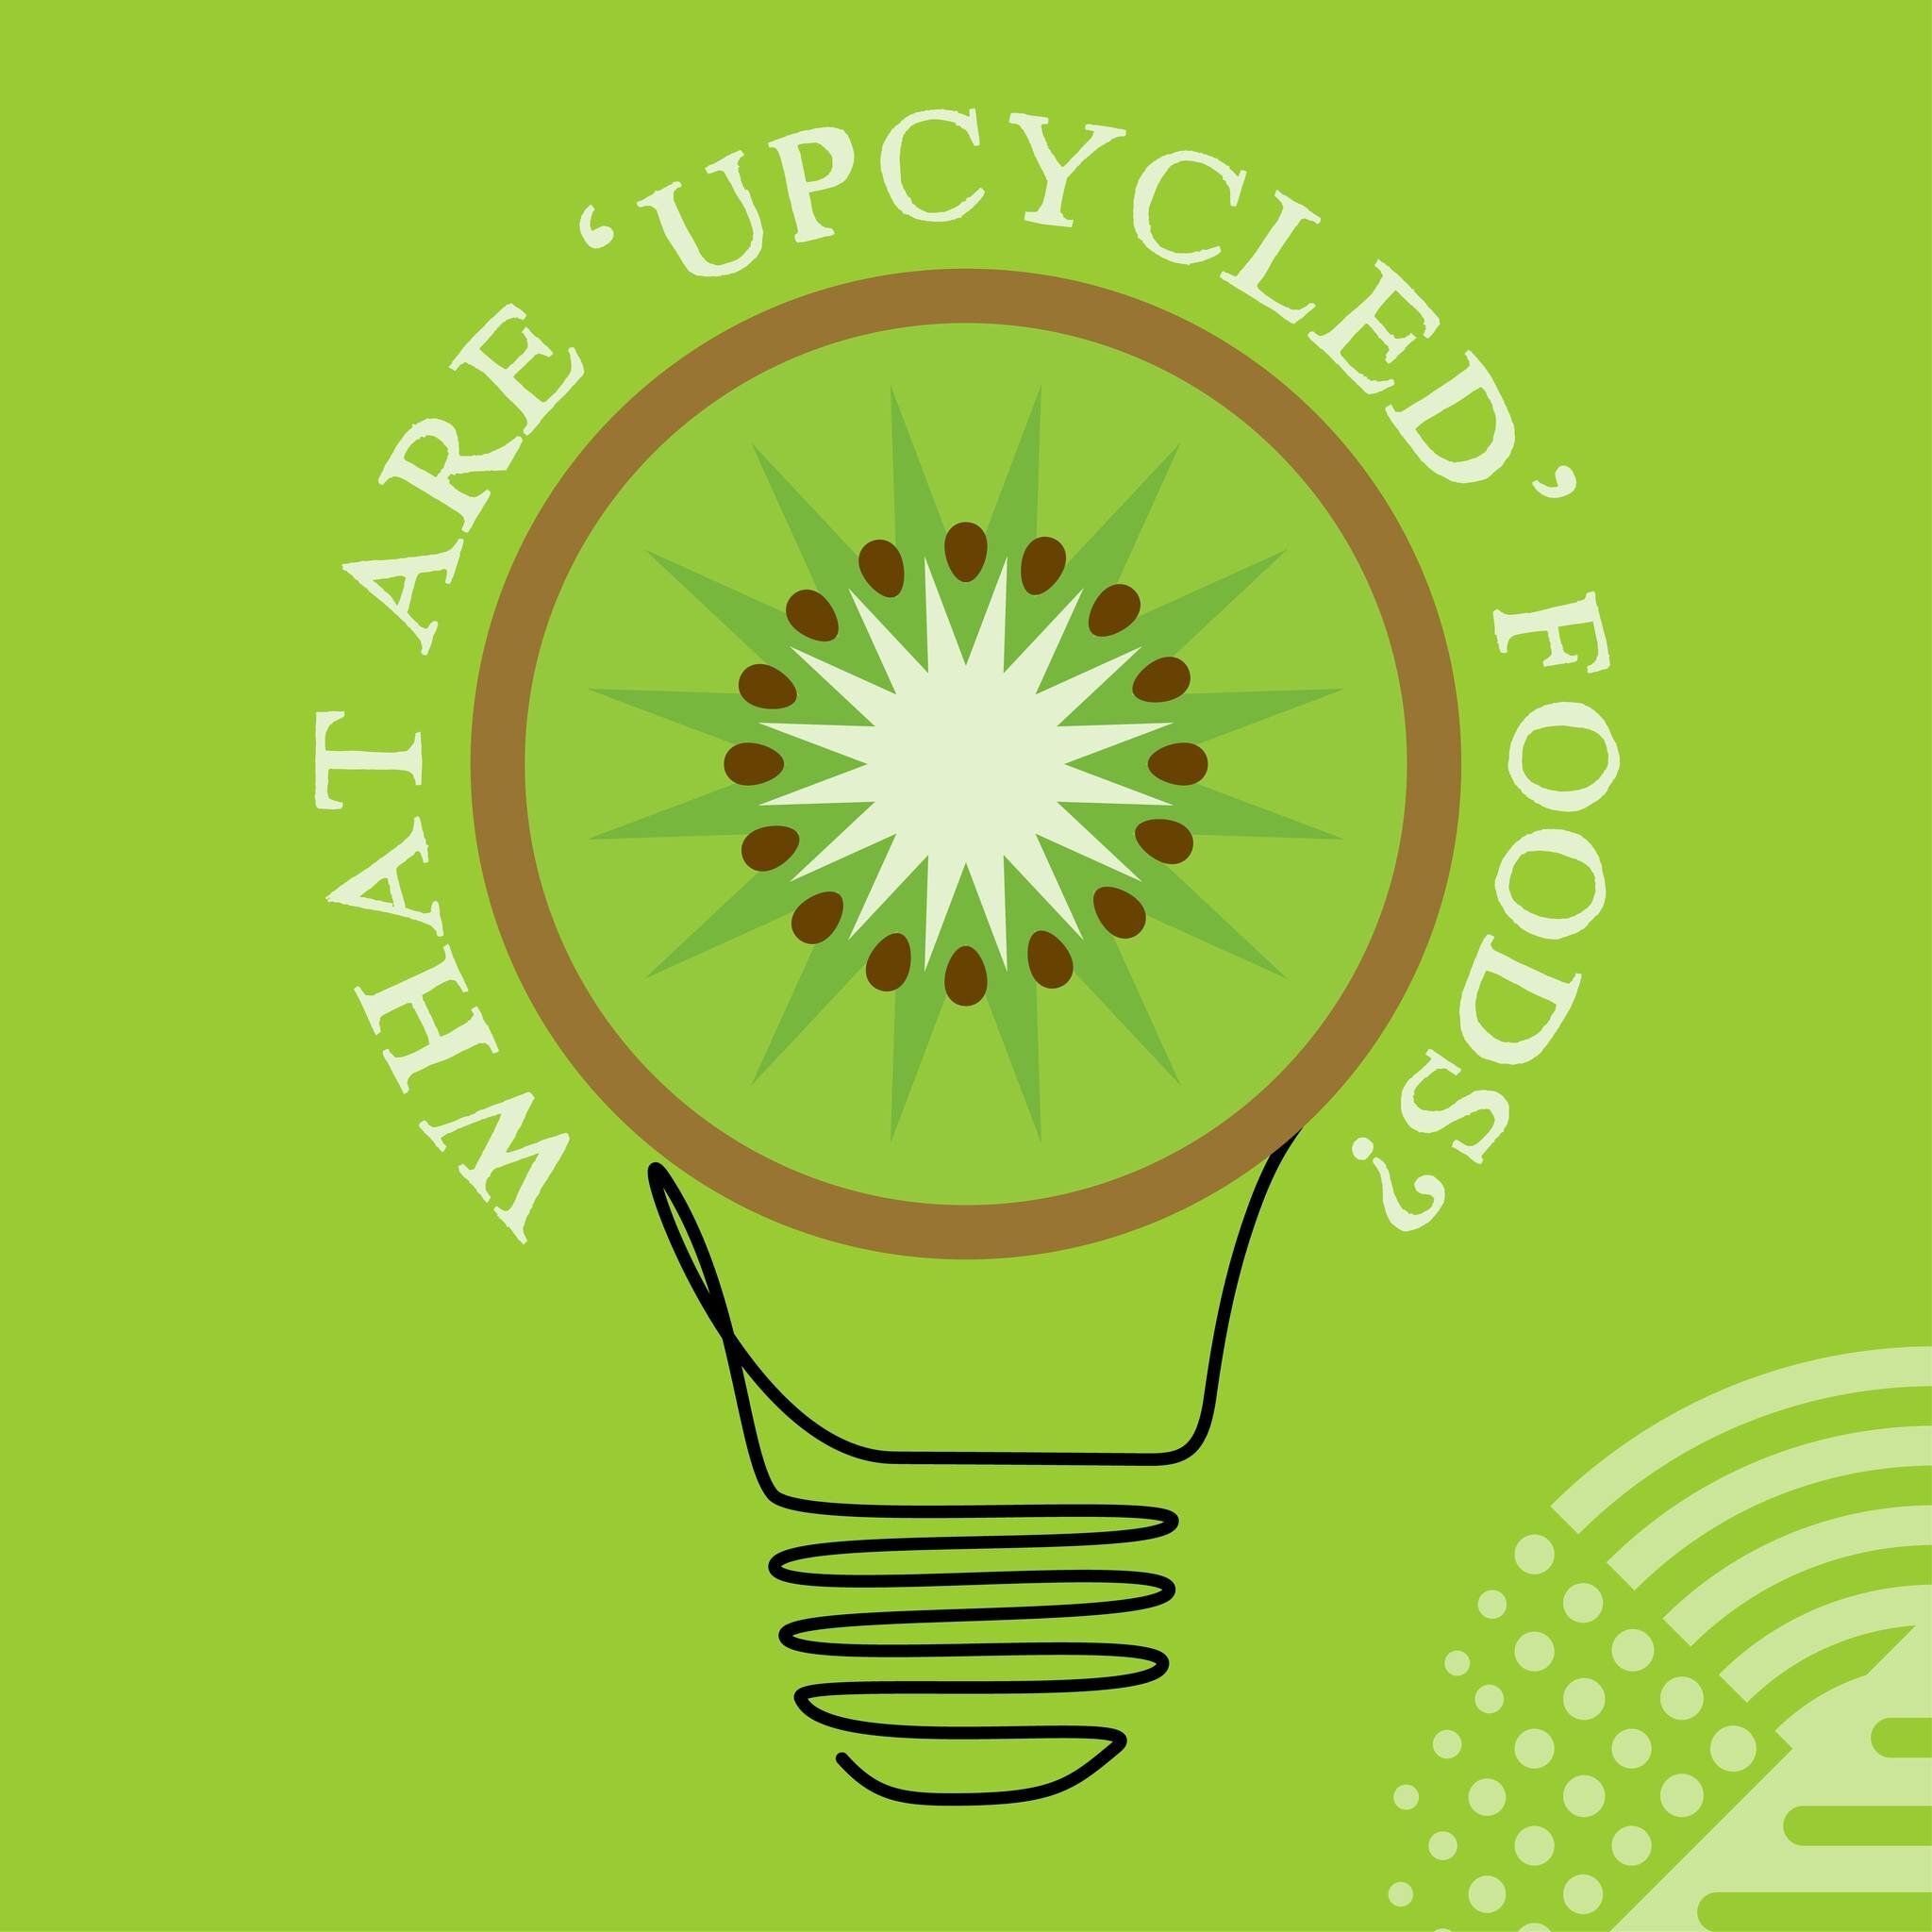 &lsquo;Upcycling&rsquo; involves the conversion of food waste streams into usable raw materials and other valuable product, addressing food waste and food insecurity. 

Upcycling offers opportunities for increased business profitability, transforming